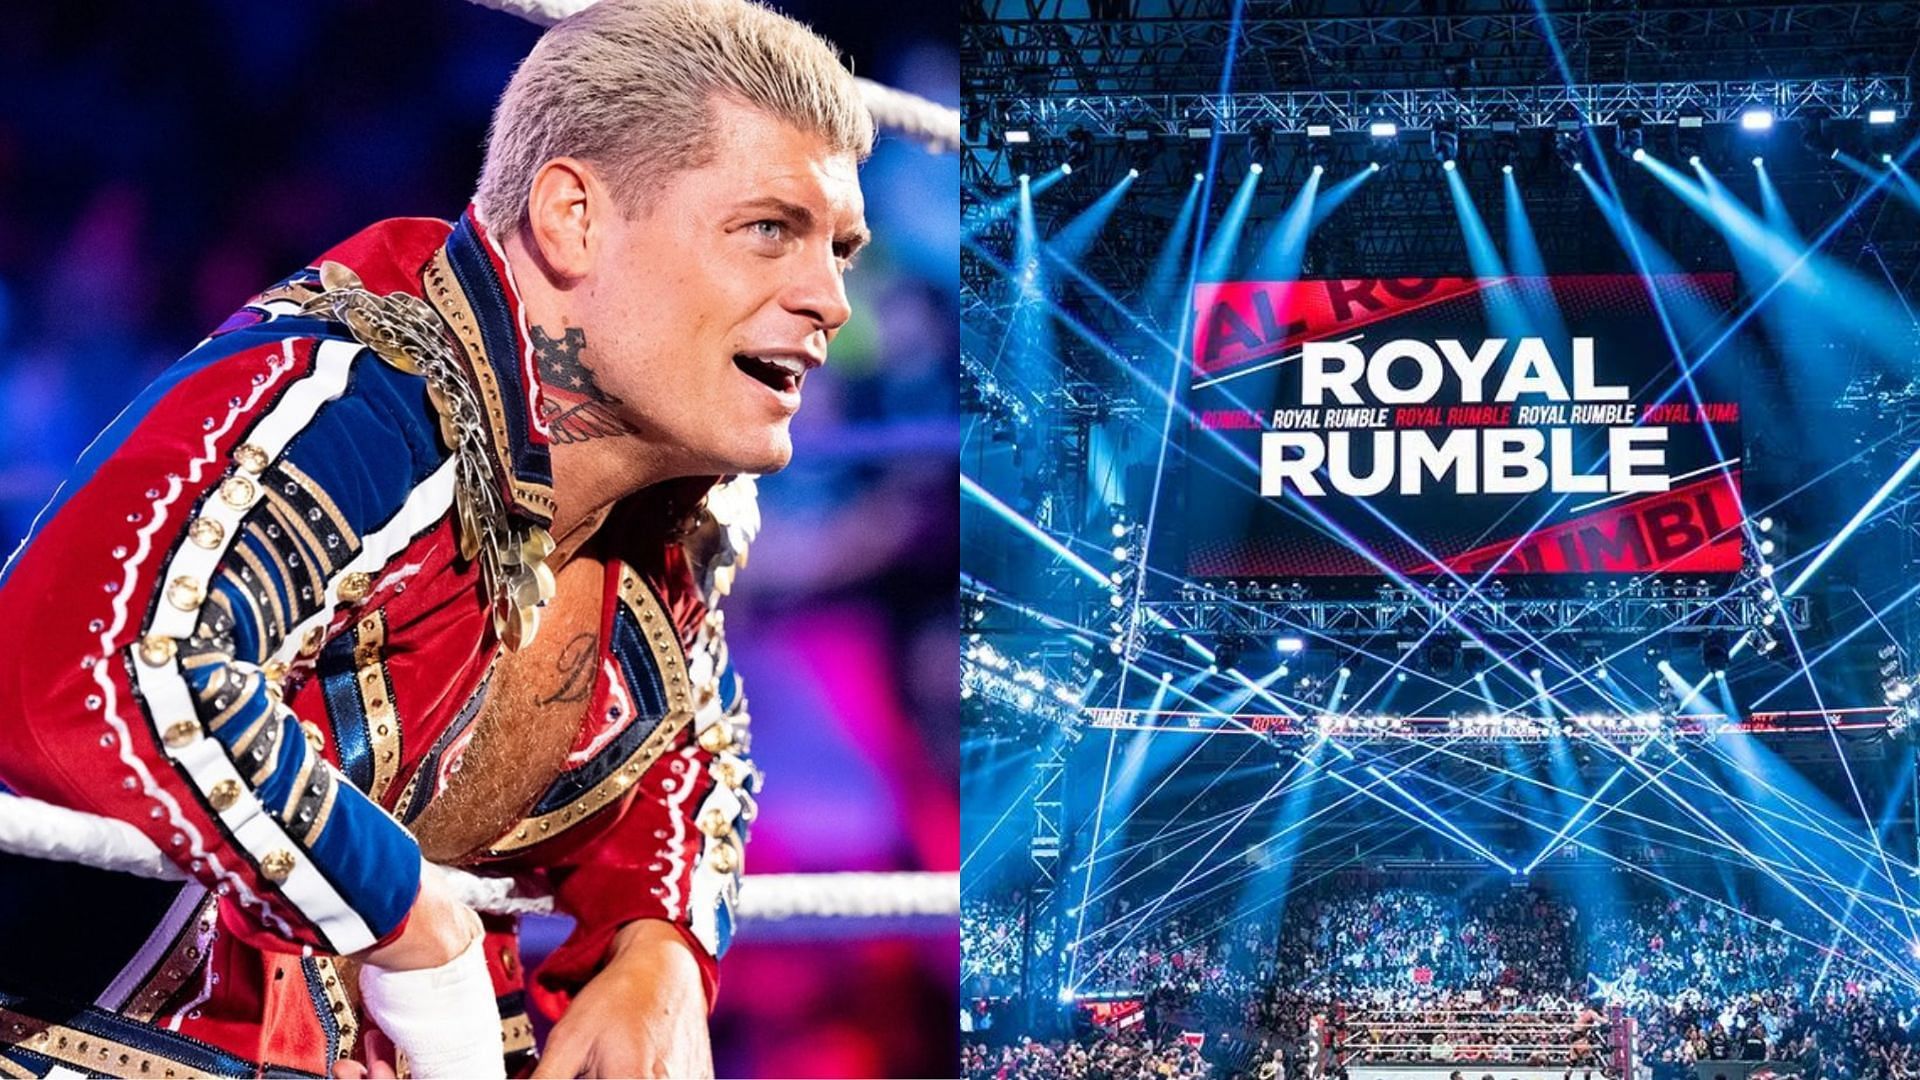 WWE Royal Rumble 2023 featured a number of returns from legends and former stars